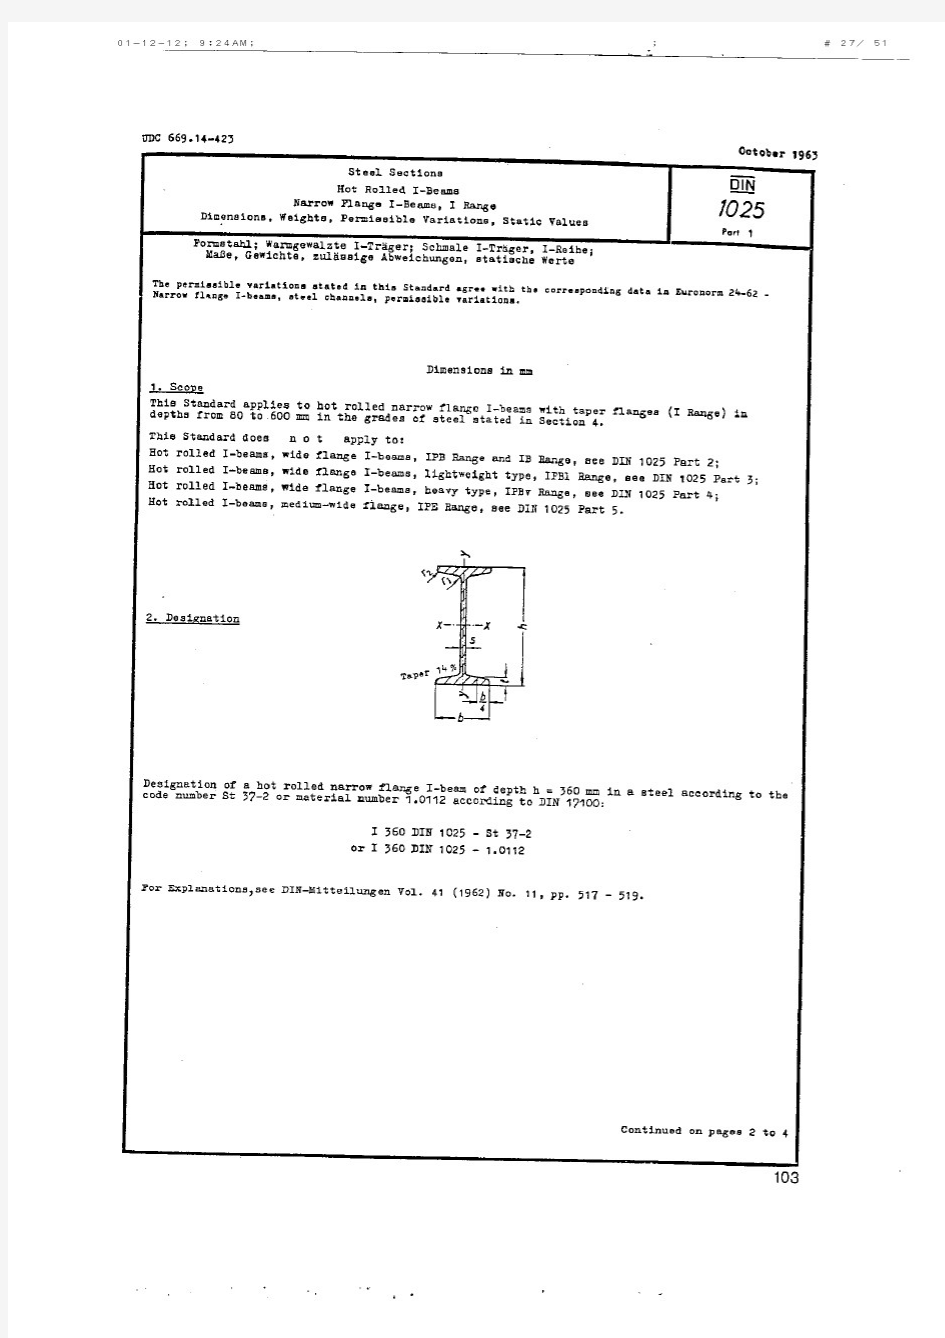 DIN1025-1-631963 Steel Sections _ Hot Rolled I-beams _ Narro